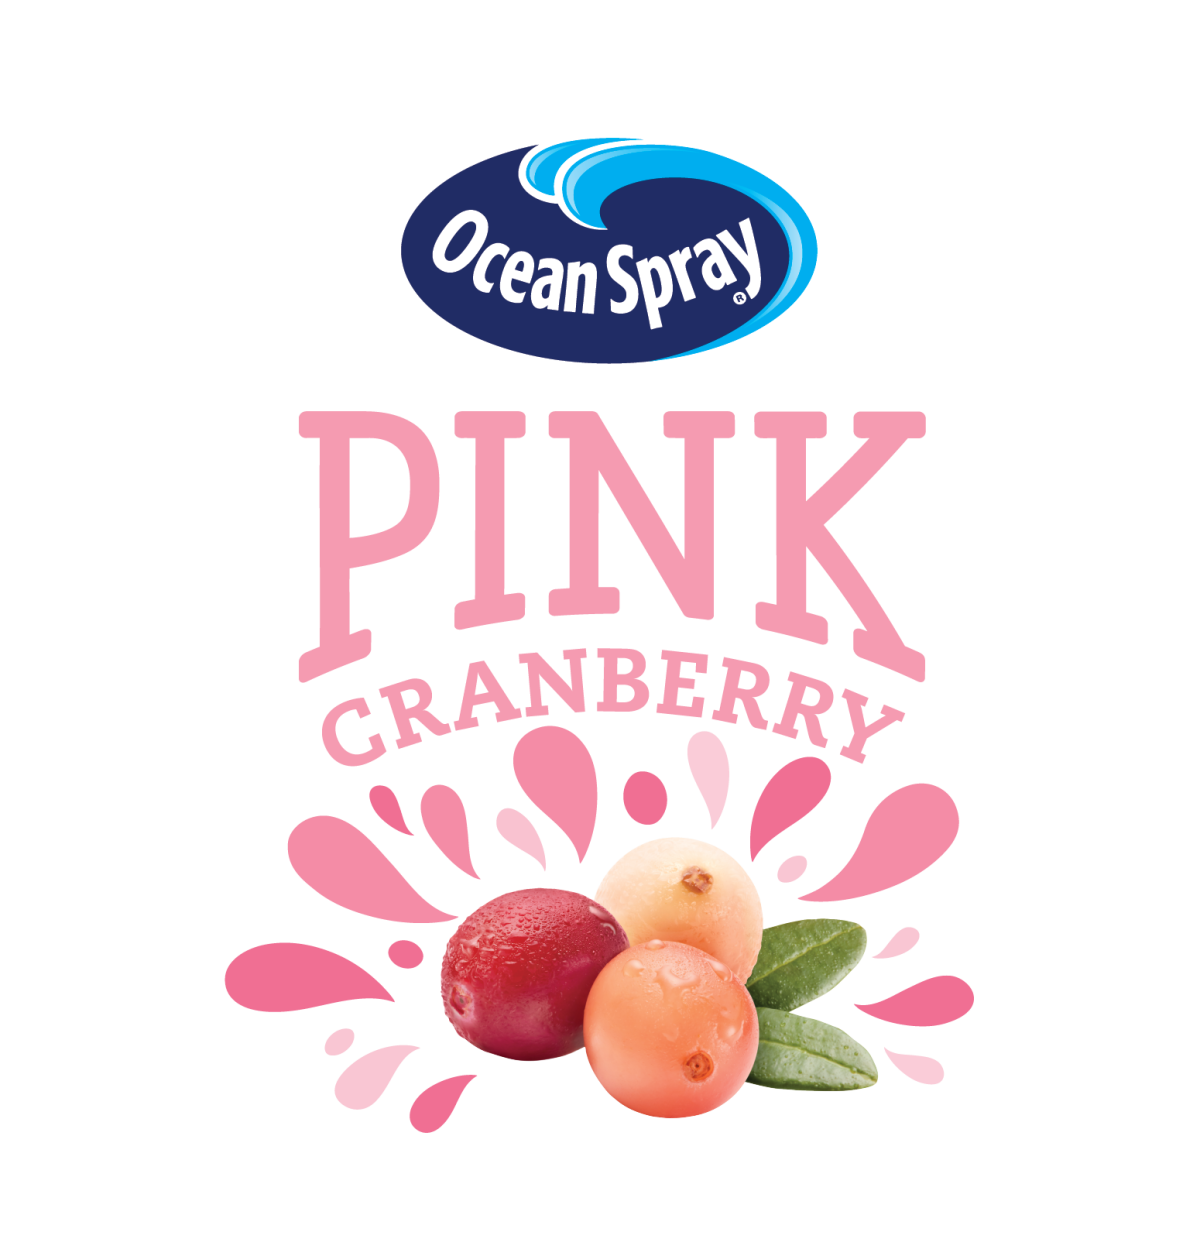 Drink Pink with the new Pink Cranberry Juice Drink by Ocean Spray®